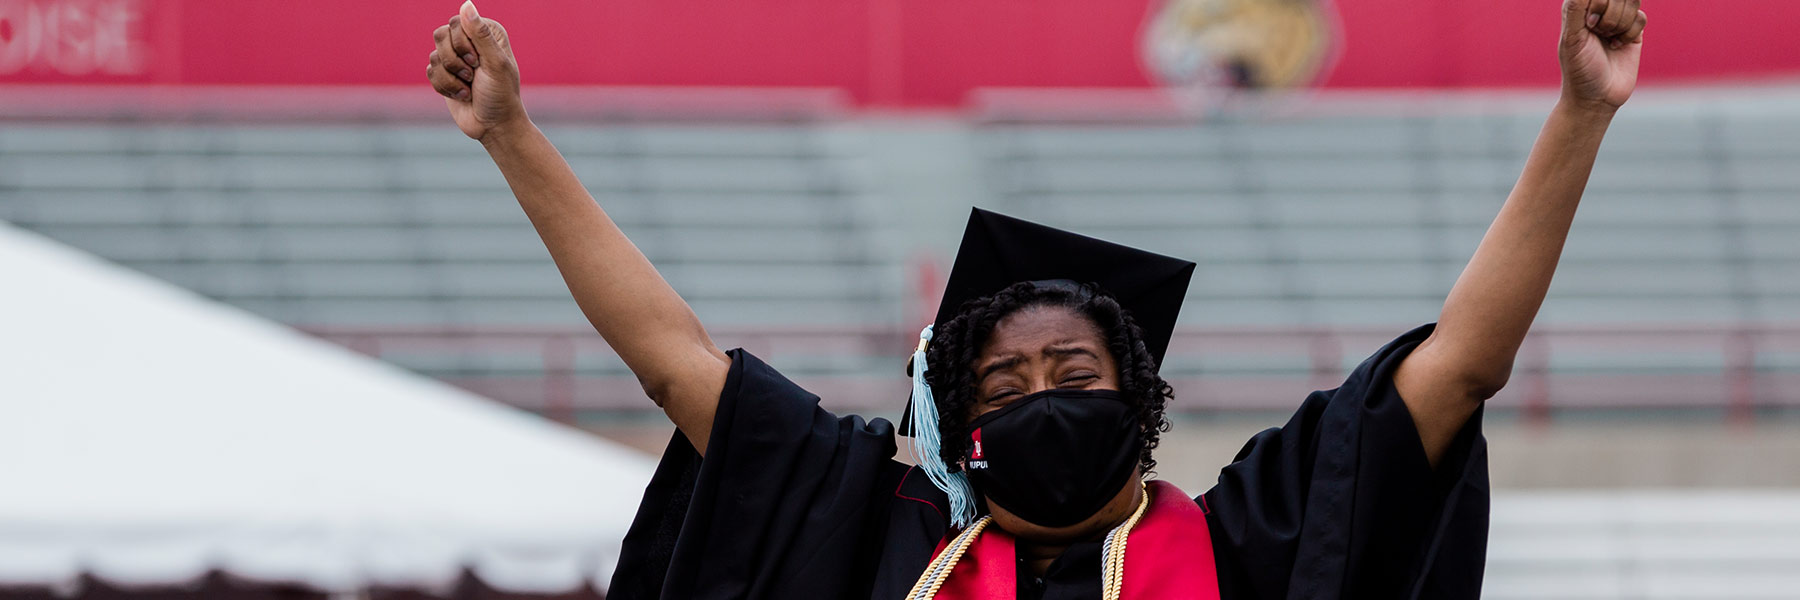 Master's graduate in cap and gown holds up her arms in excitement